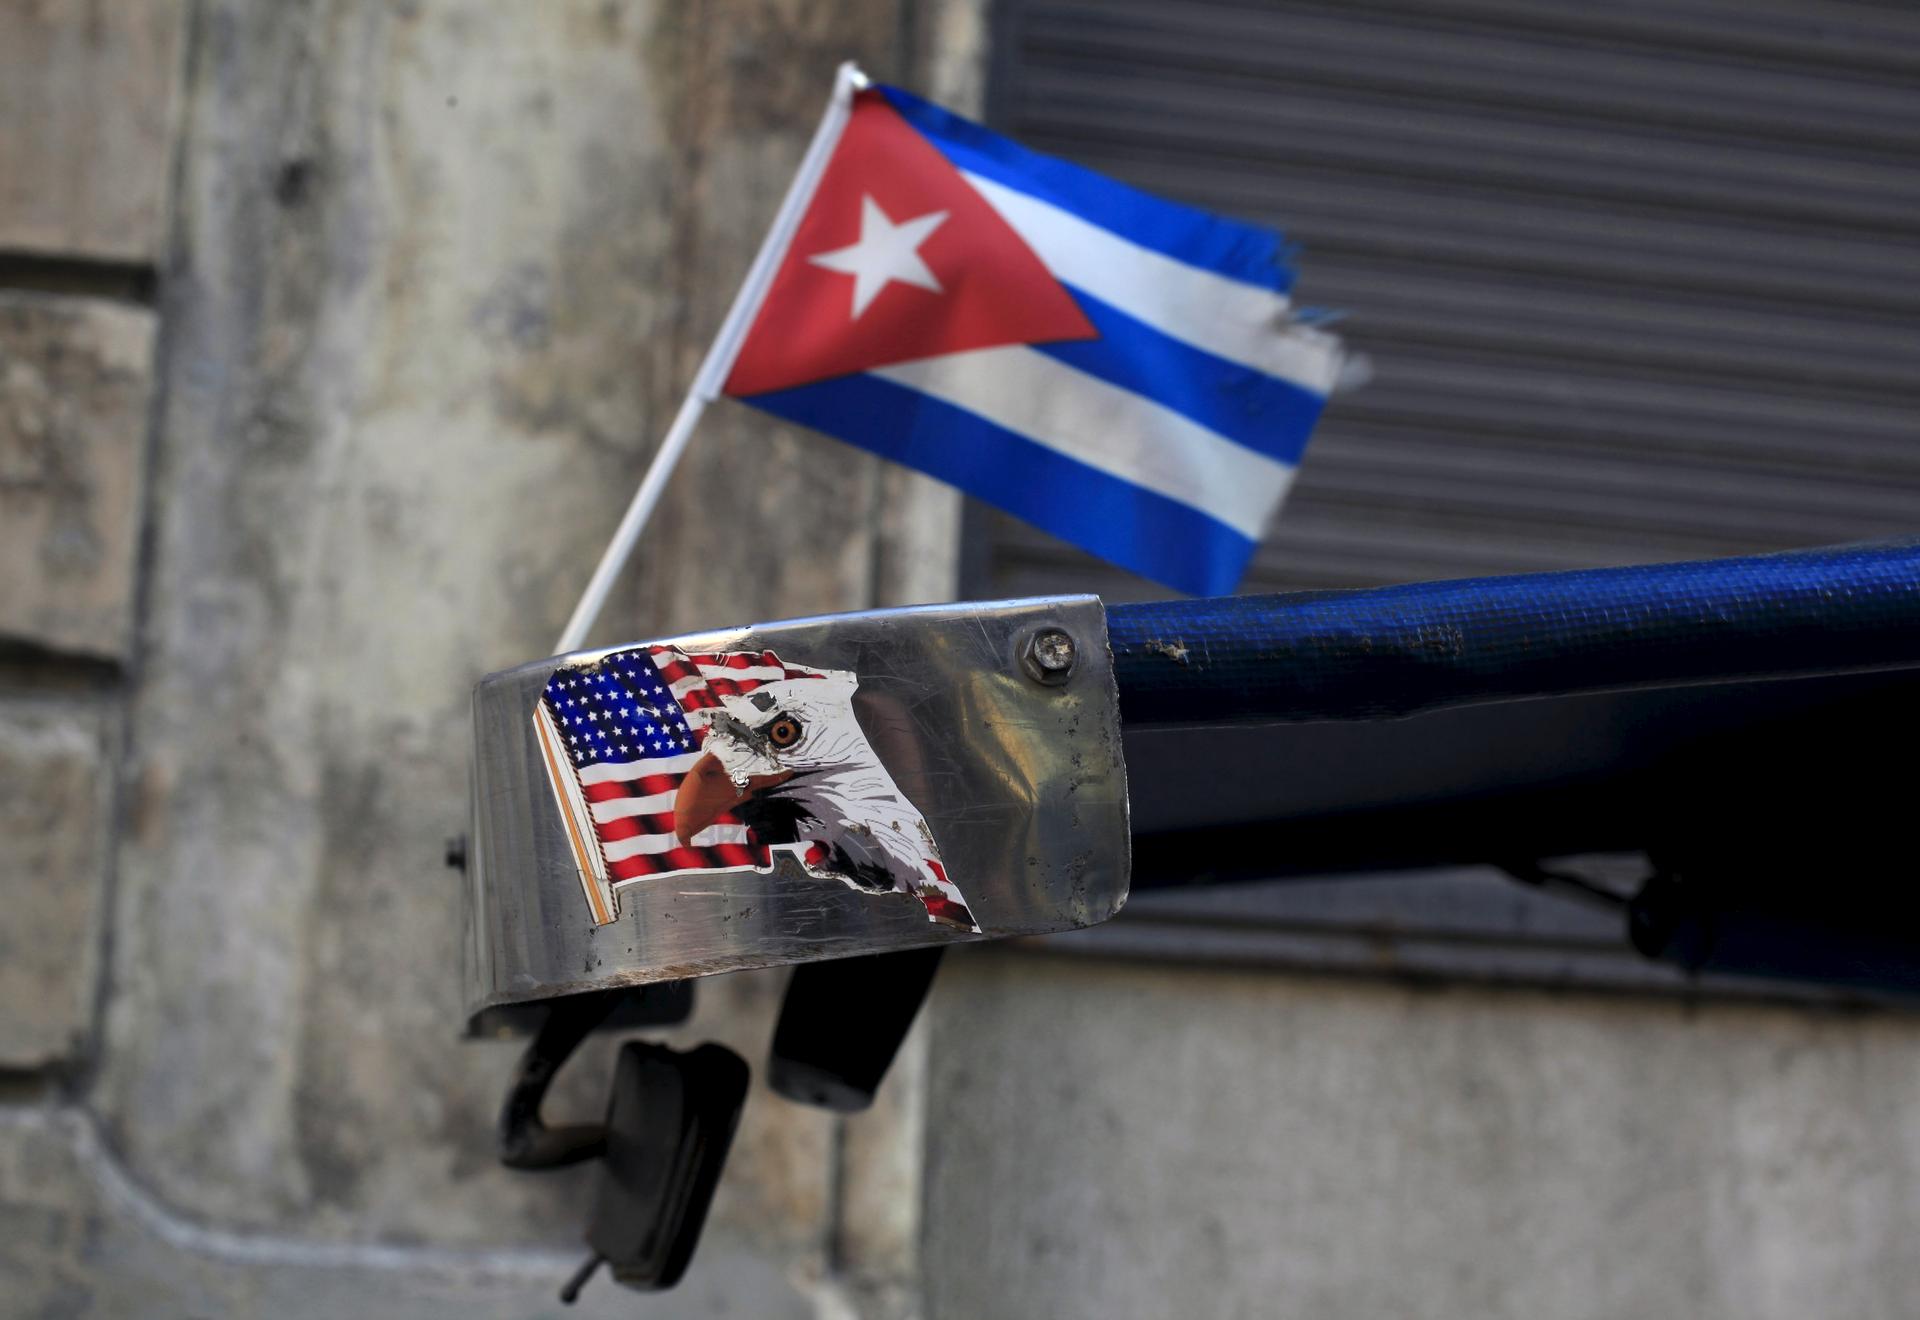 A Cuban flag and a sticker of a U.S. flag are seen on the roof of tricycle taxi in Havana March 9, 2016.